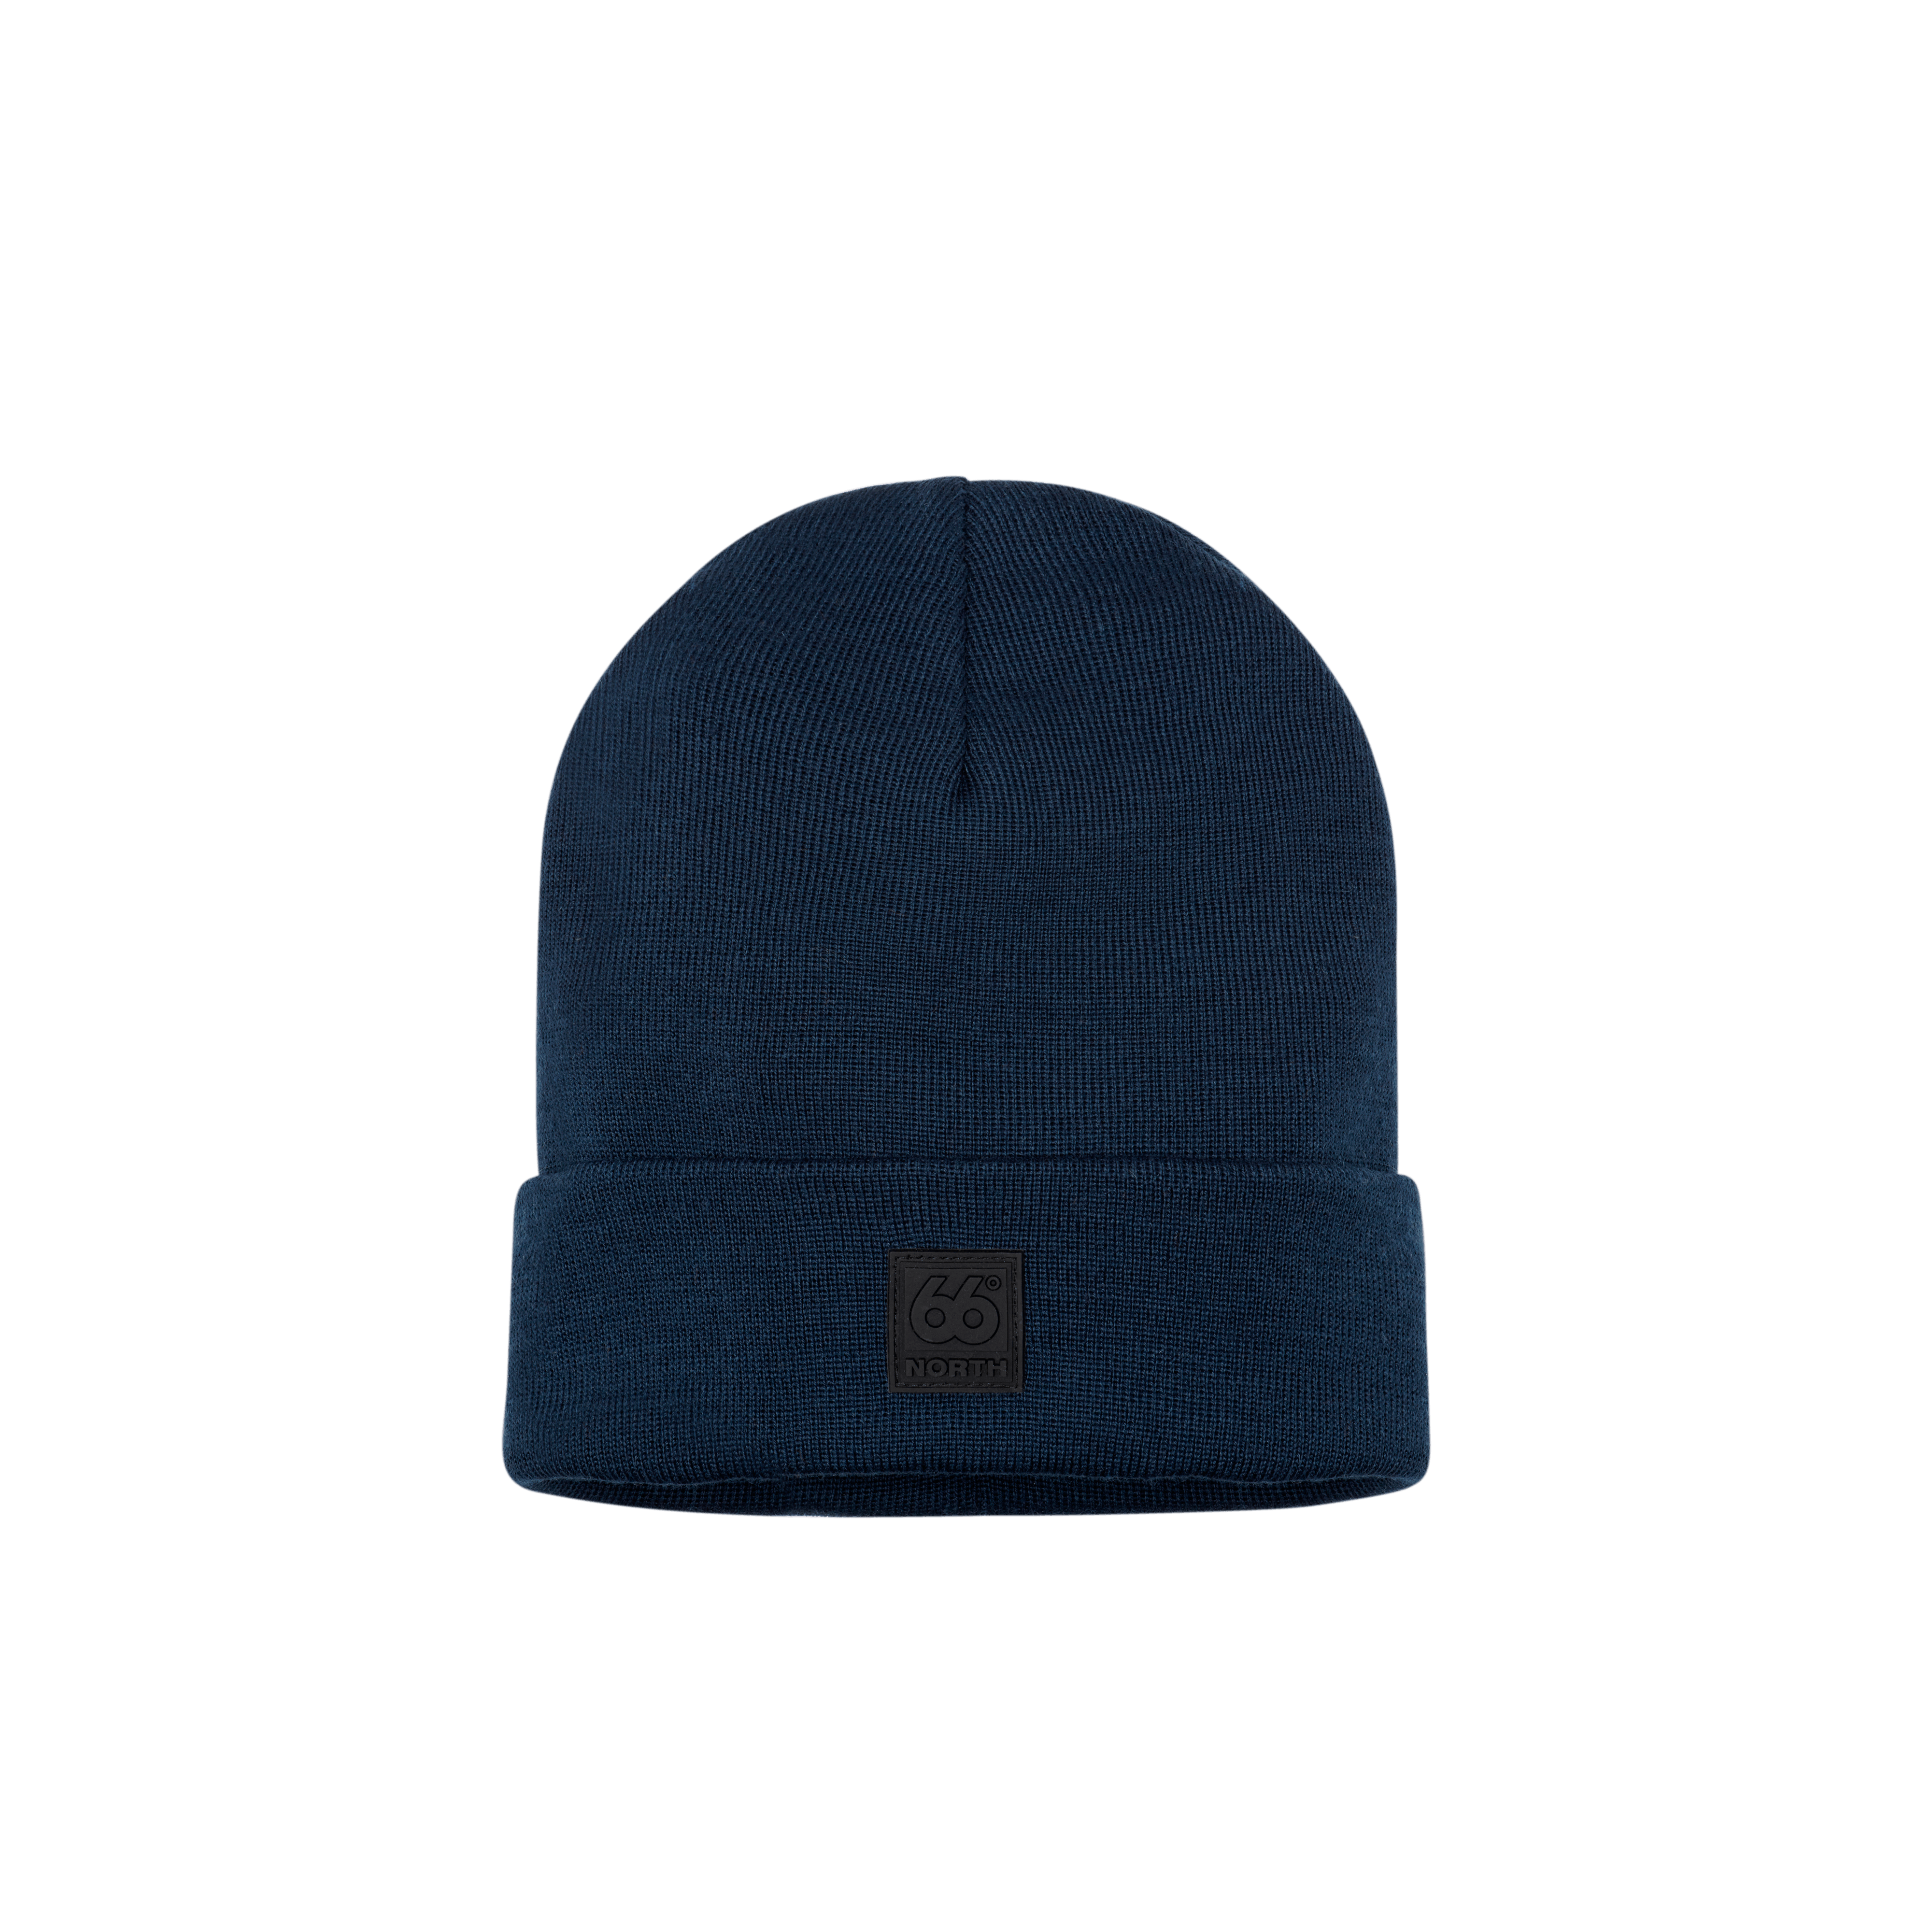 66 NORTH WOMEN'S 66°NORTH ACCESSORIES - NAVY - ONE SIZE,T88236